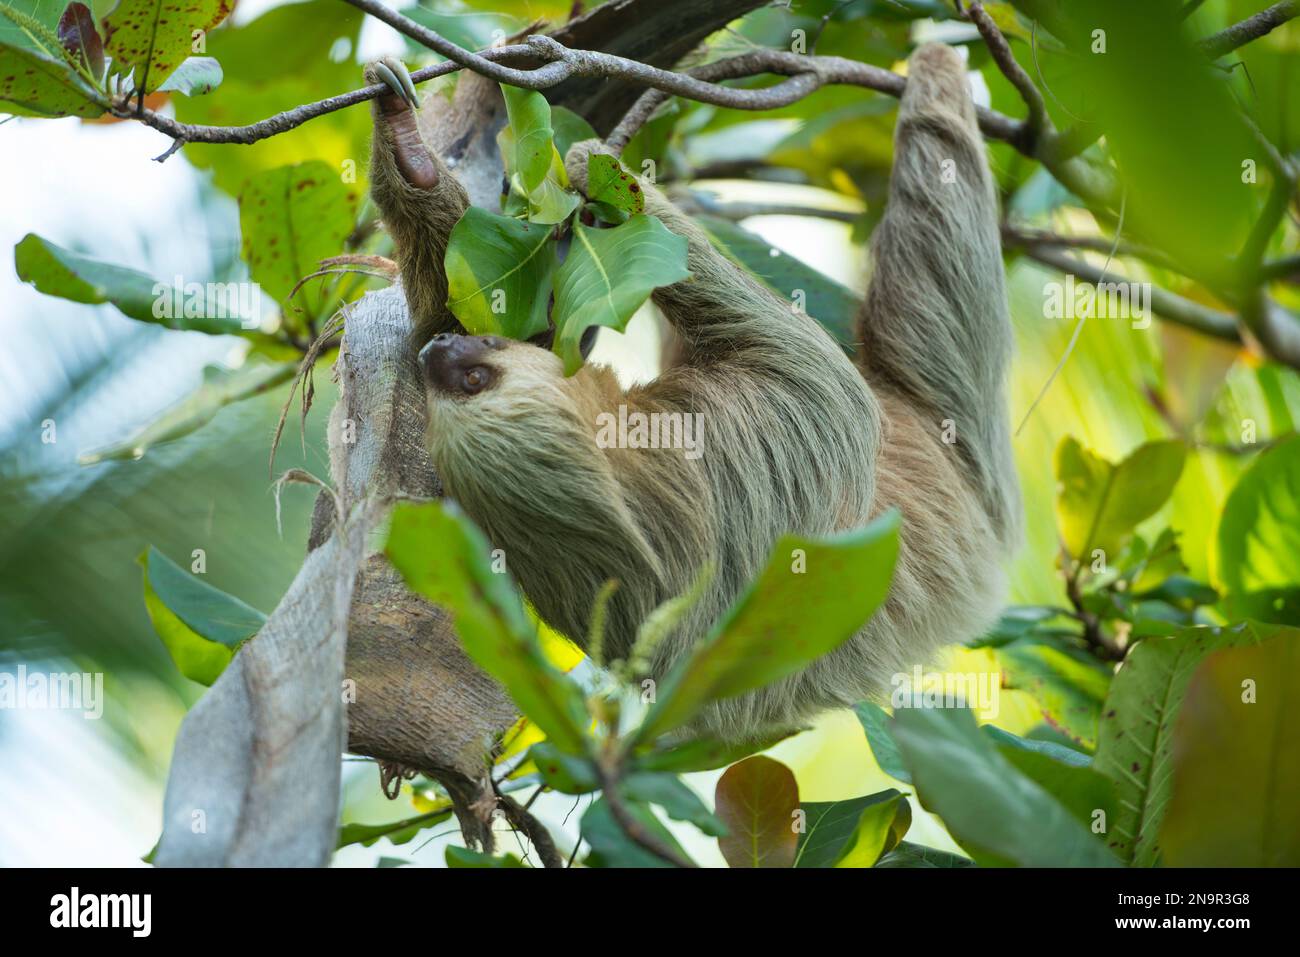 Two-toed sloth (Choloepus sp.) hangs on a tree branch in Manuel Antonio National Park, Costa Rica; Costa Rica Stock Photo